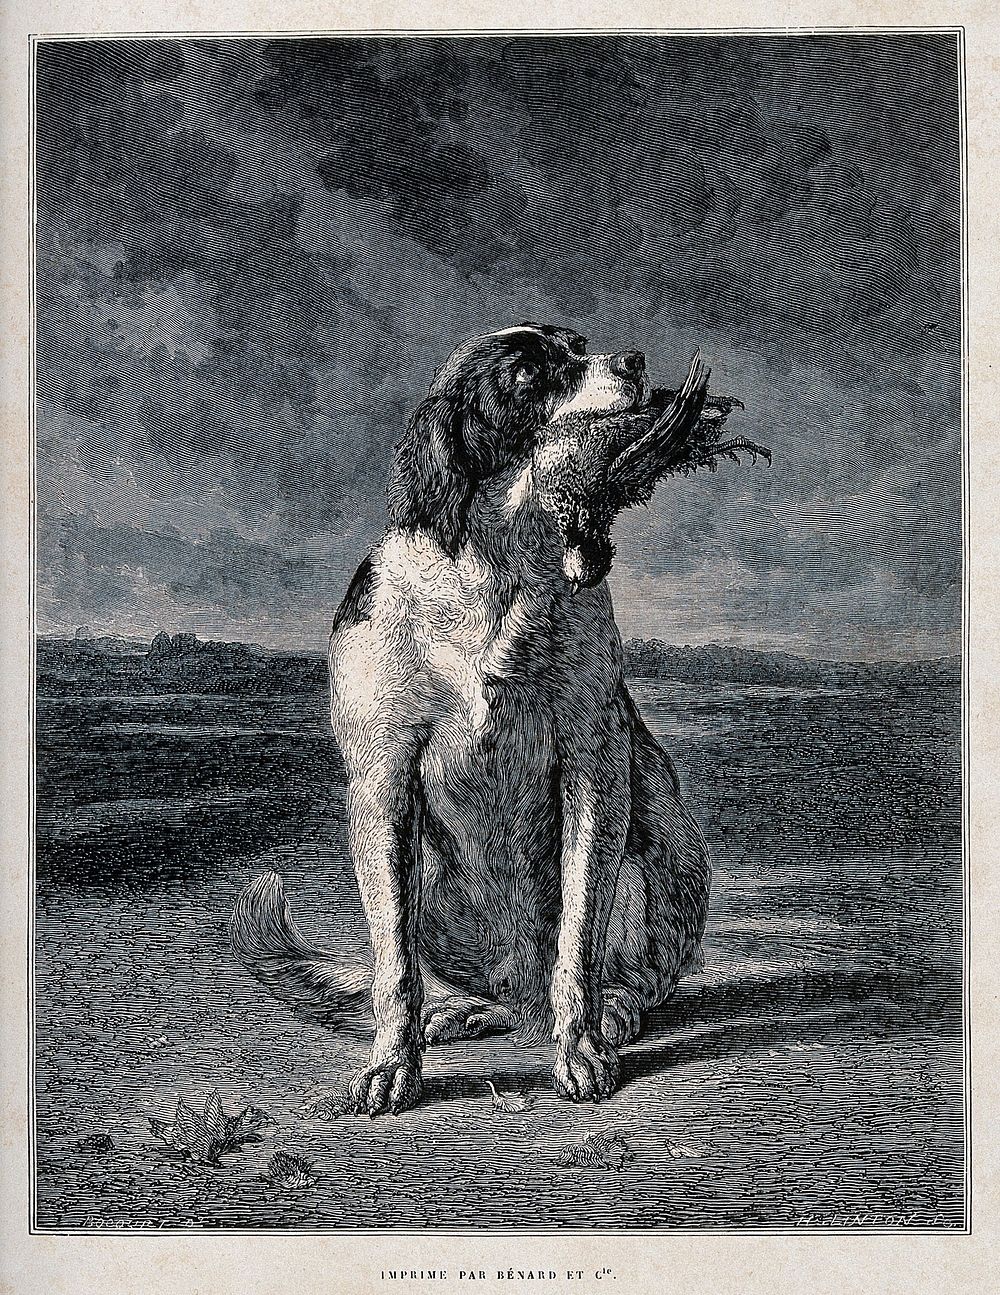 A hunting dog sitting with a game bird in its mouth. Wood engraving by H. D. Linton after Bocquet.